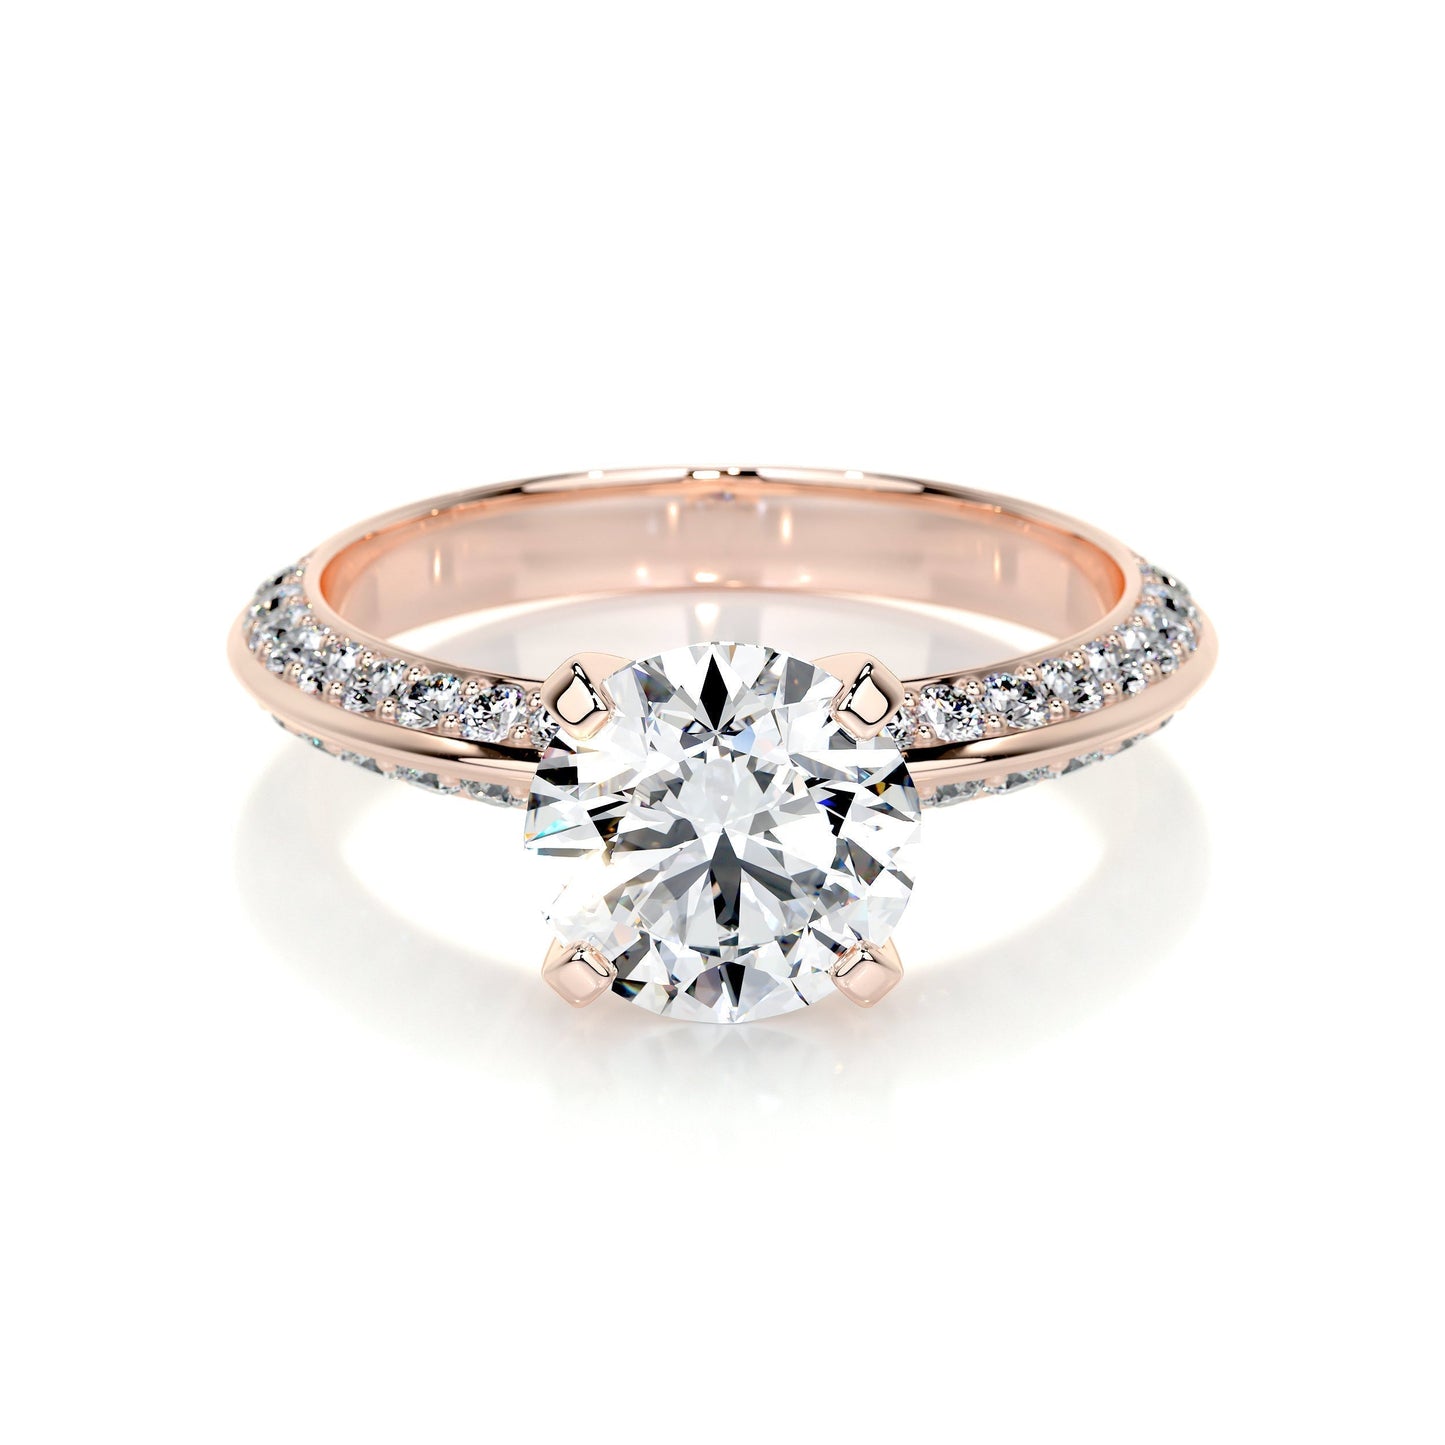 2.0 CT Round Solitaire CVD E/VS2 Diamond Engagement Ring 15